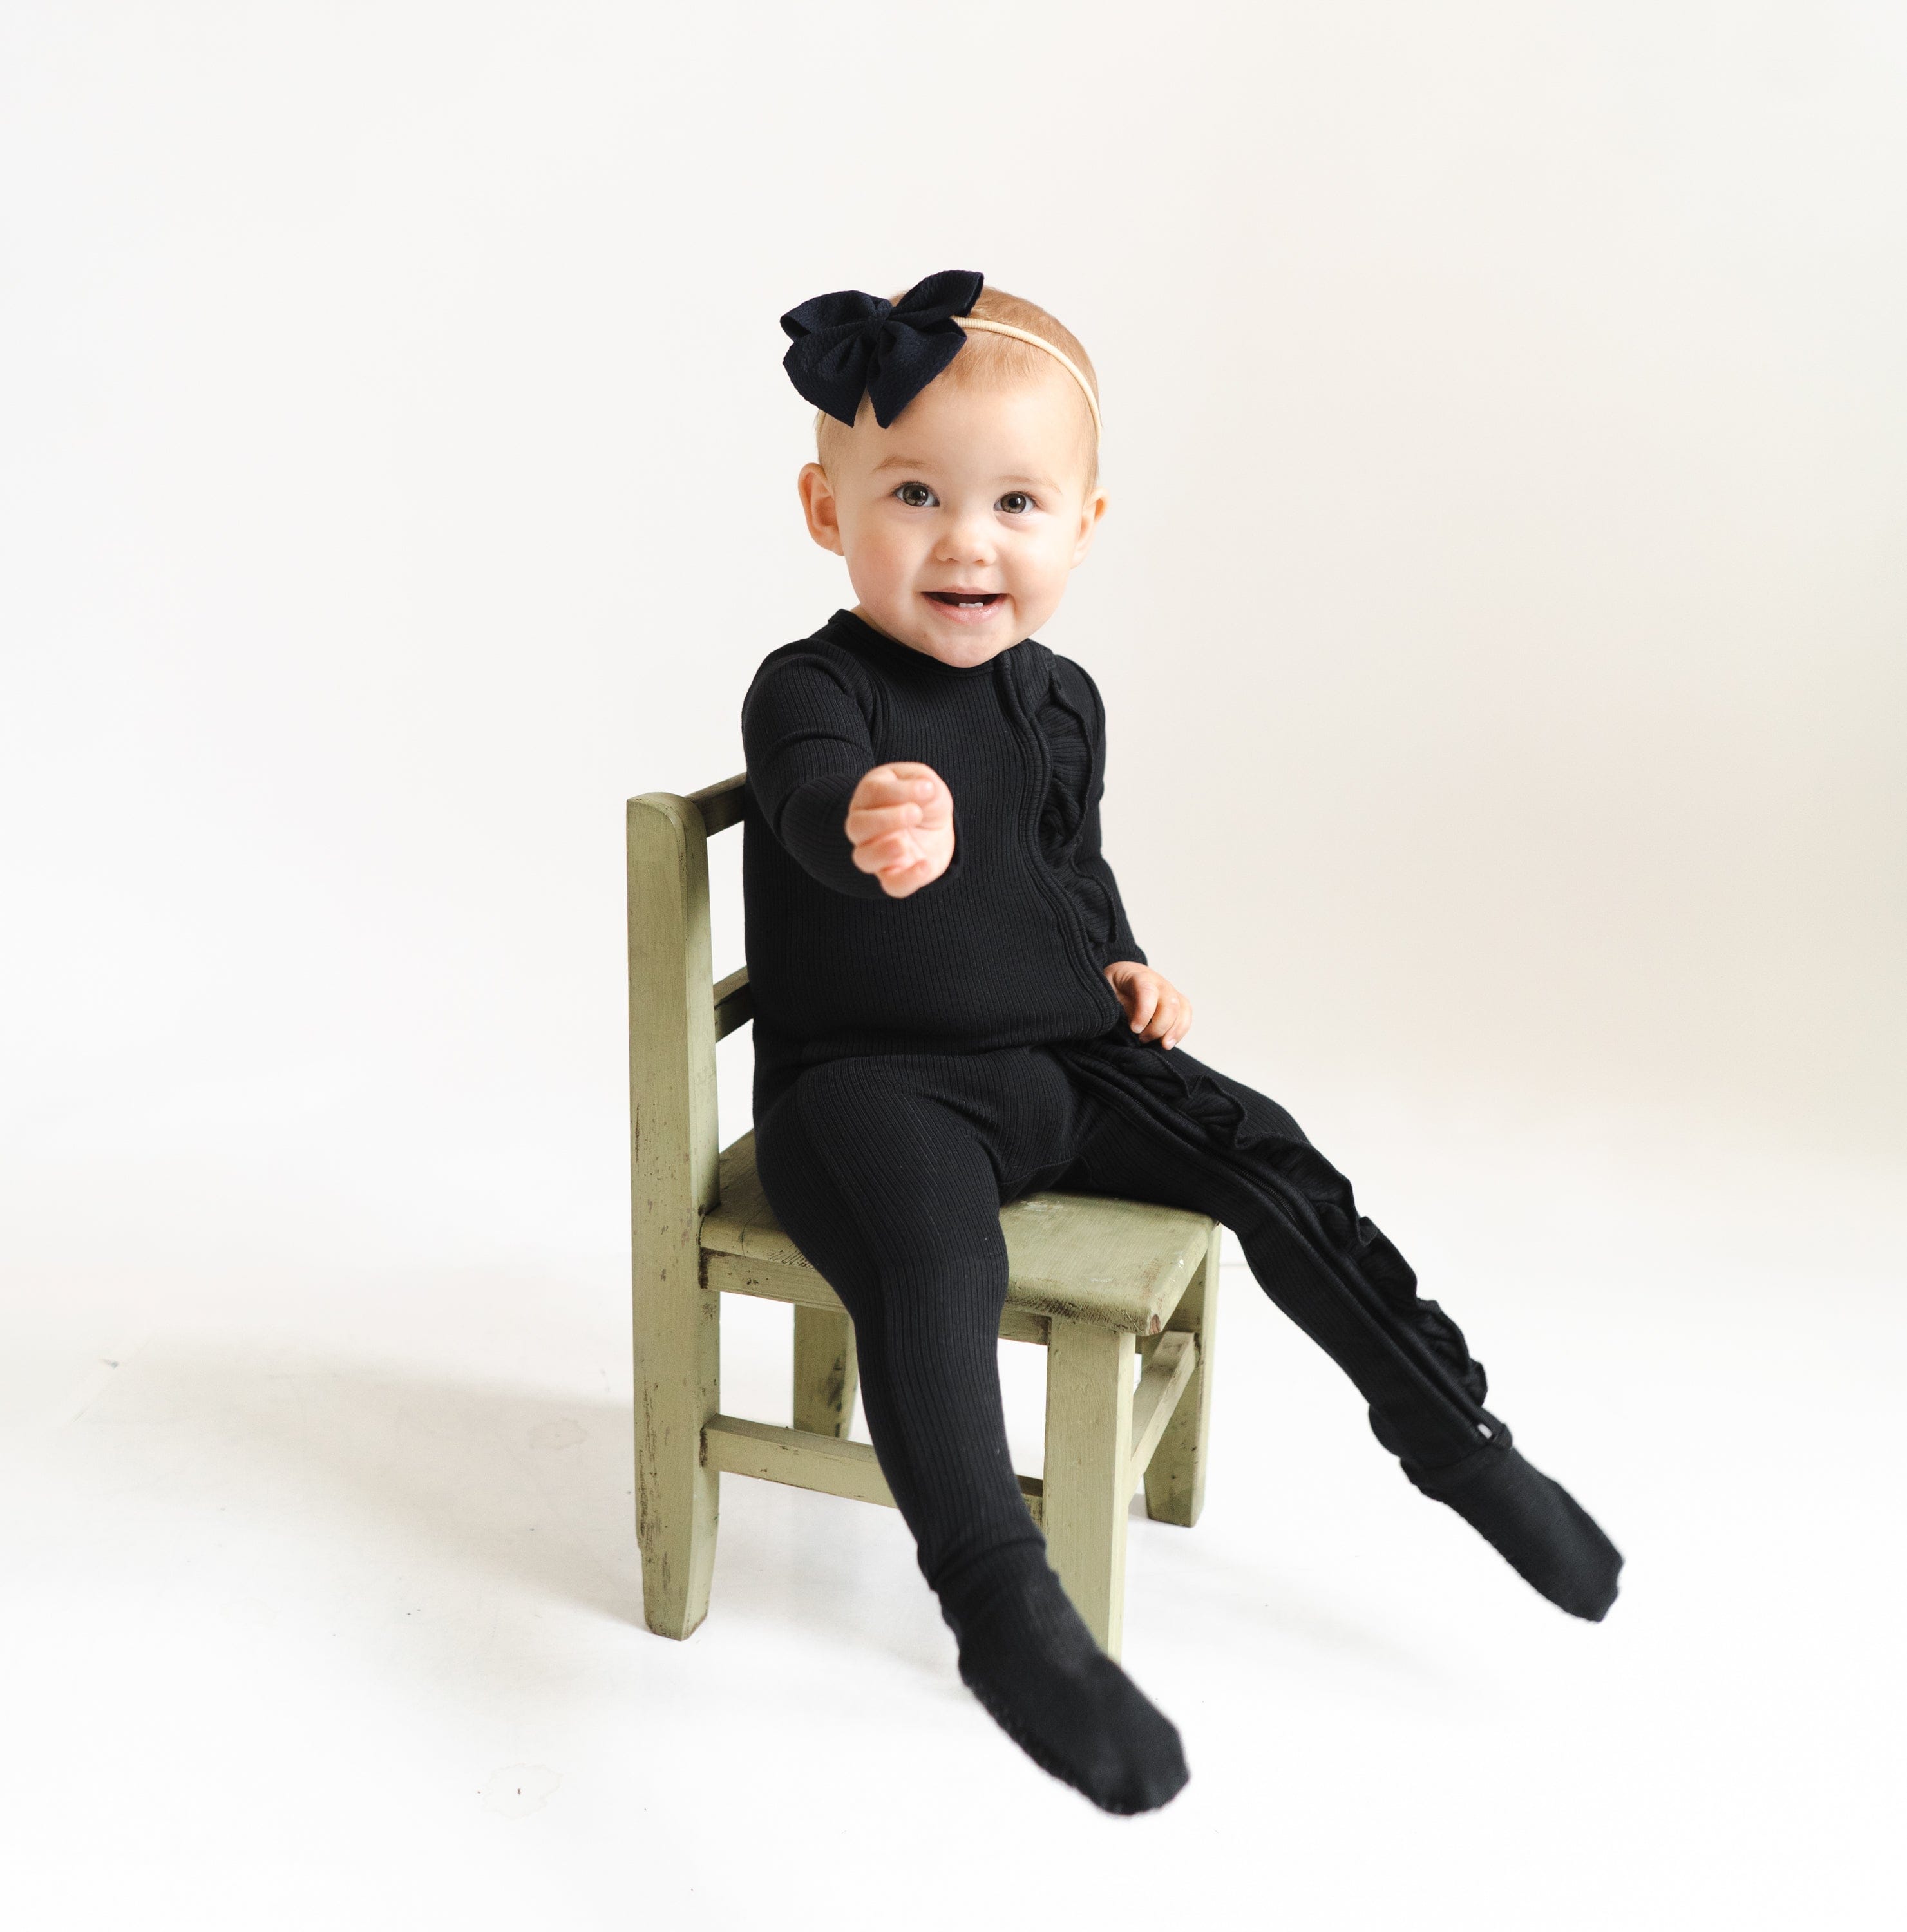 Kyte Baby Ribbed Ruffle Zipper Footie Ribbed Ruffle Zipper Footie in Midnight